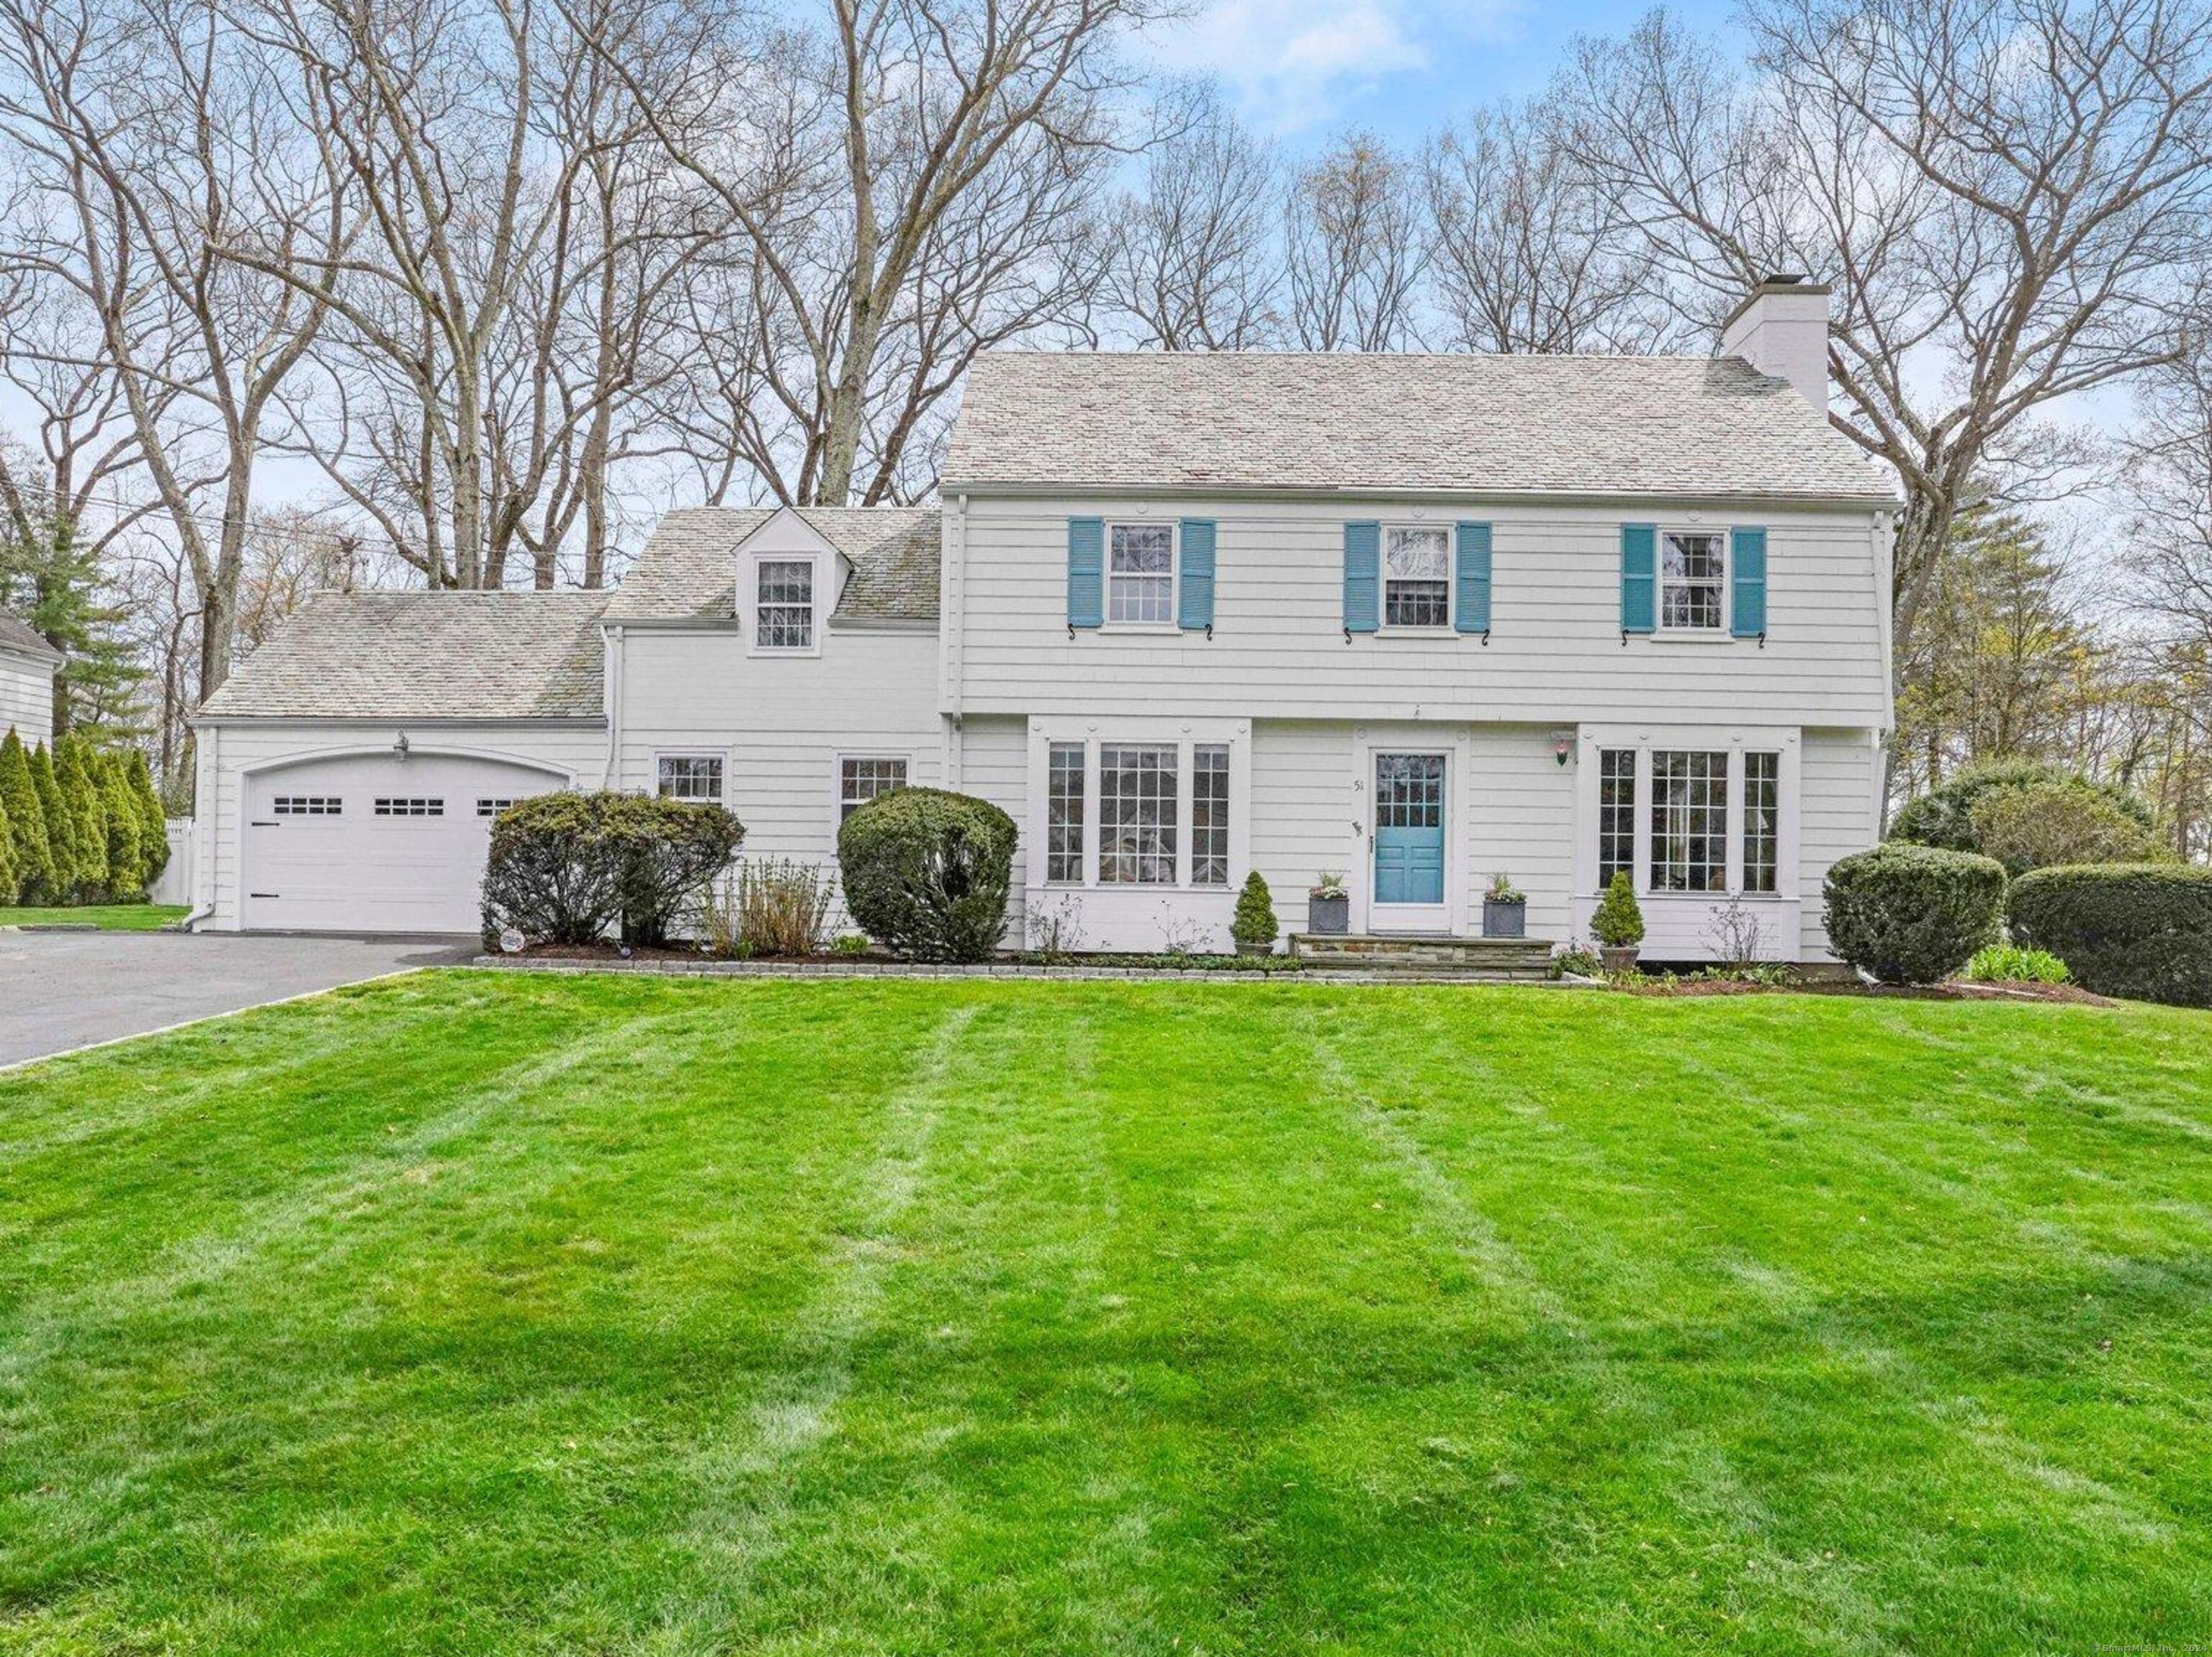 Fabulous Center Hall Colonial with remarkable curb appeal on one of Fairfield's prettiest streets. This 1939 charmer boasts fresh updates, hardwood floors, custom millwork, and oversized windows providing natural light throughout. The gracious room scale and terrific flow make this house feel - and live - much larger than its 2,743 sq.ft. A lush property with sparkling in-ground Gunite pool add up to a dreamy lifestyle at 51 Stoneleigh.  The inviting interiors begin with a welcoming foyer flanked by formal dining room and front-to-back living room with fireplace - both with large box bay windows. Bright eat-in kitchen serves up new Quartz countertops, stainless steel appliances, pantry, center island and glass door to a large deck providing an easy entertaining flow whether grilling, al fresco dining, wine by the fire pit, or s'mores at the outdoor stone fireplace.  The spacious family room has a large fireplace, built-in bar and floor-to-ceiling bay window overlooking the park-like property. The adjacent cheerful sun room leads to the fenced-in pool area and lovely pool house with 1/2 bath and kitchenette, bordered by perennial gardens.  Upstairs the primary suite accommodates a king-size bed, closets galore and window seat. Primary bath with radiant heat floors, double sinks, shower stall and a balcony overlooking the scenic backyard. Three more sunny bedrooms and tasteful hallway bathroom complete the second floor. A second staircase leads to one of the bedrooms,